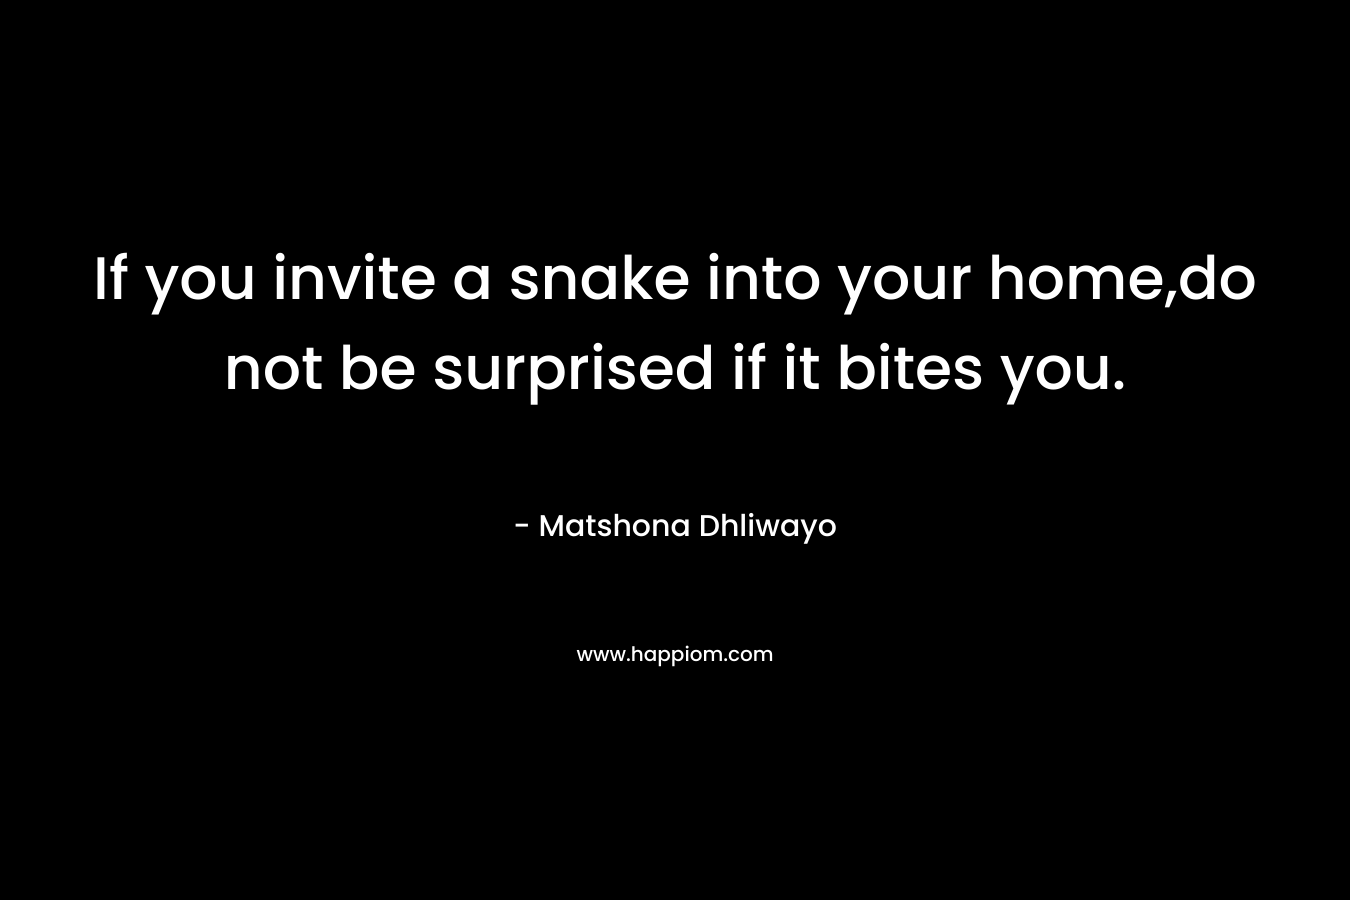 If you invite a snake into your home,do not be surprised if it bites you. – Matshona Dhliwayo